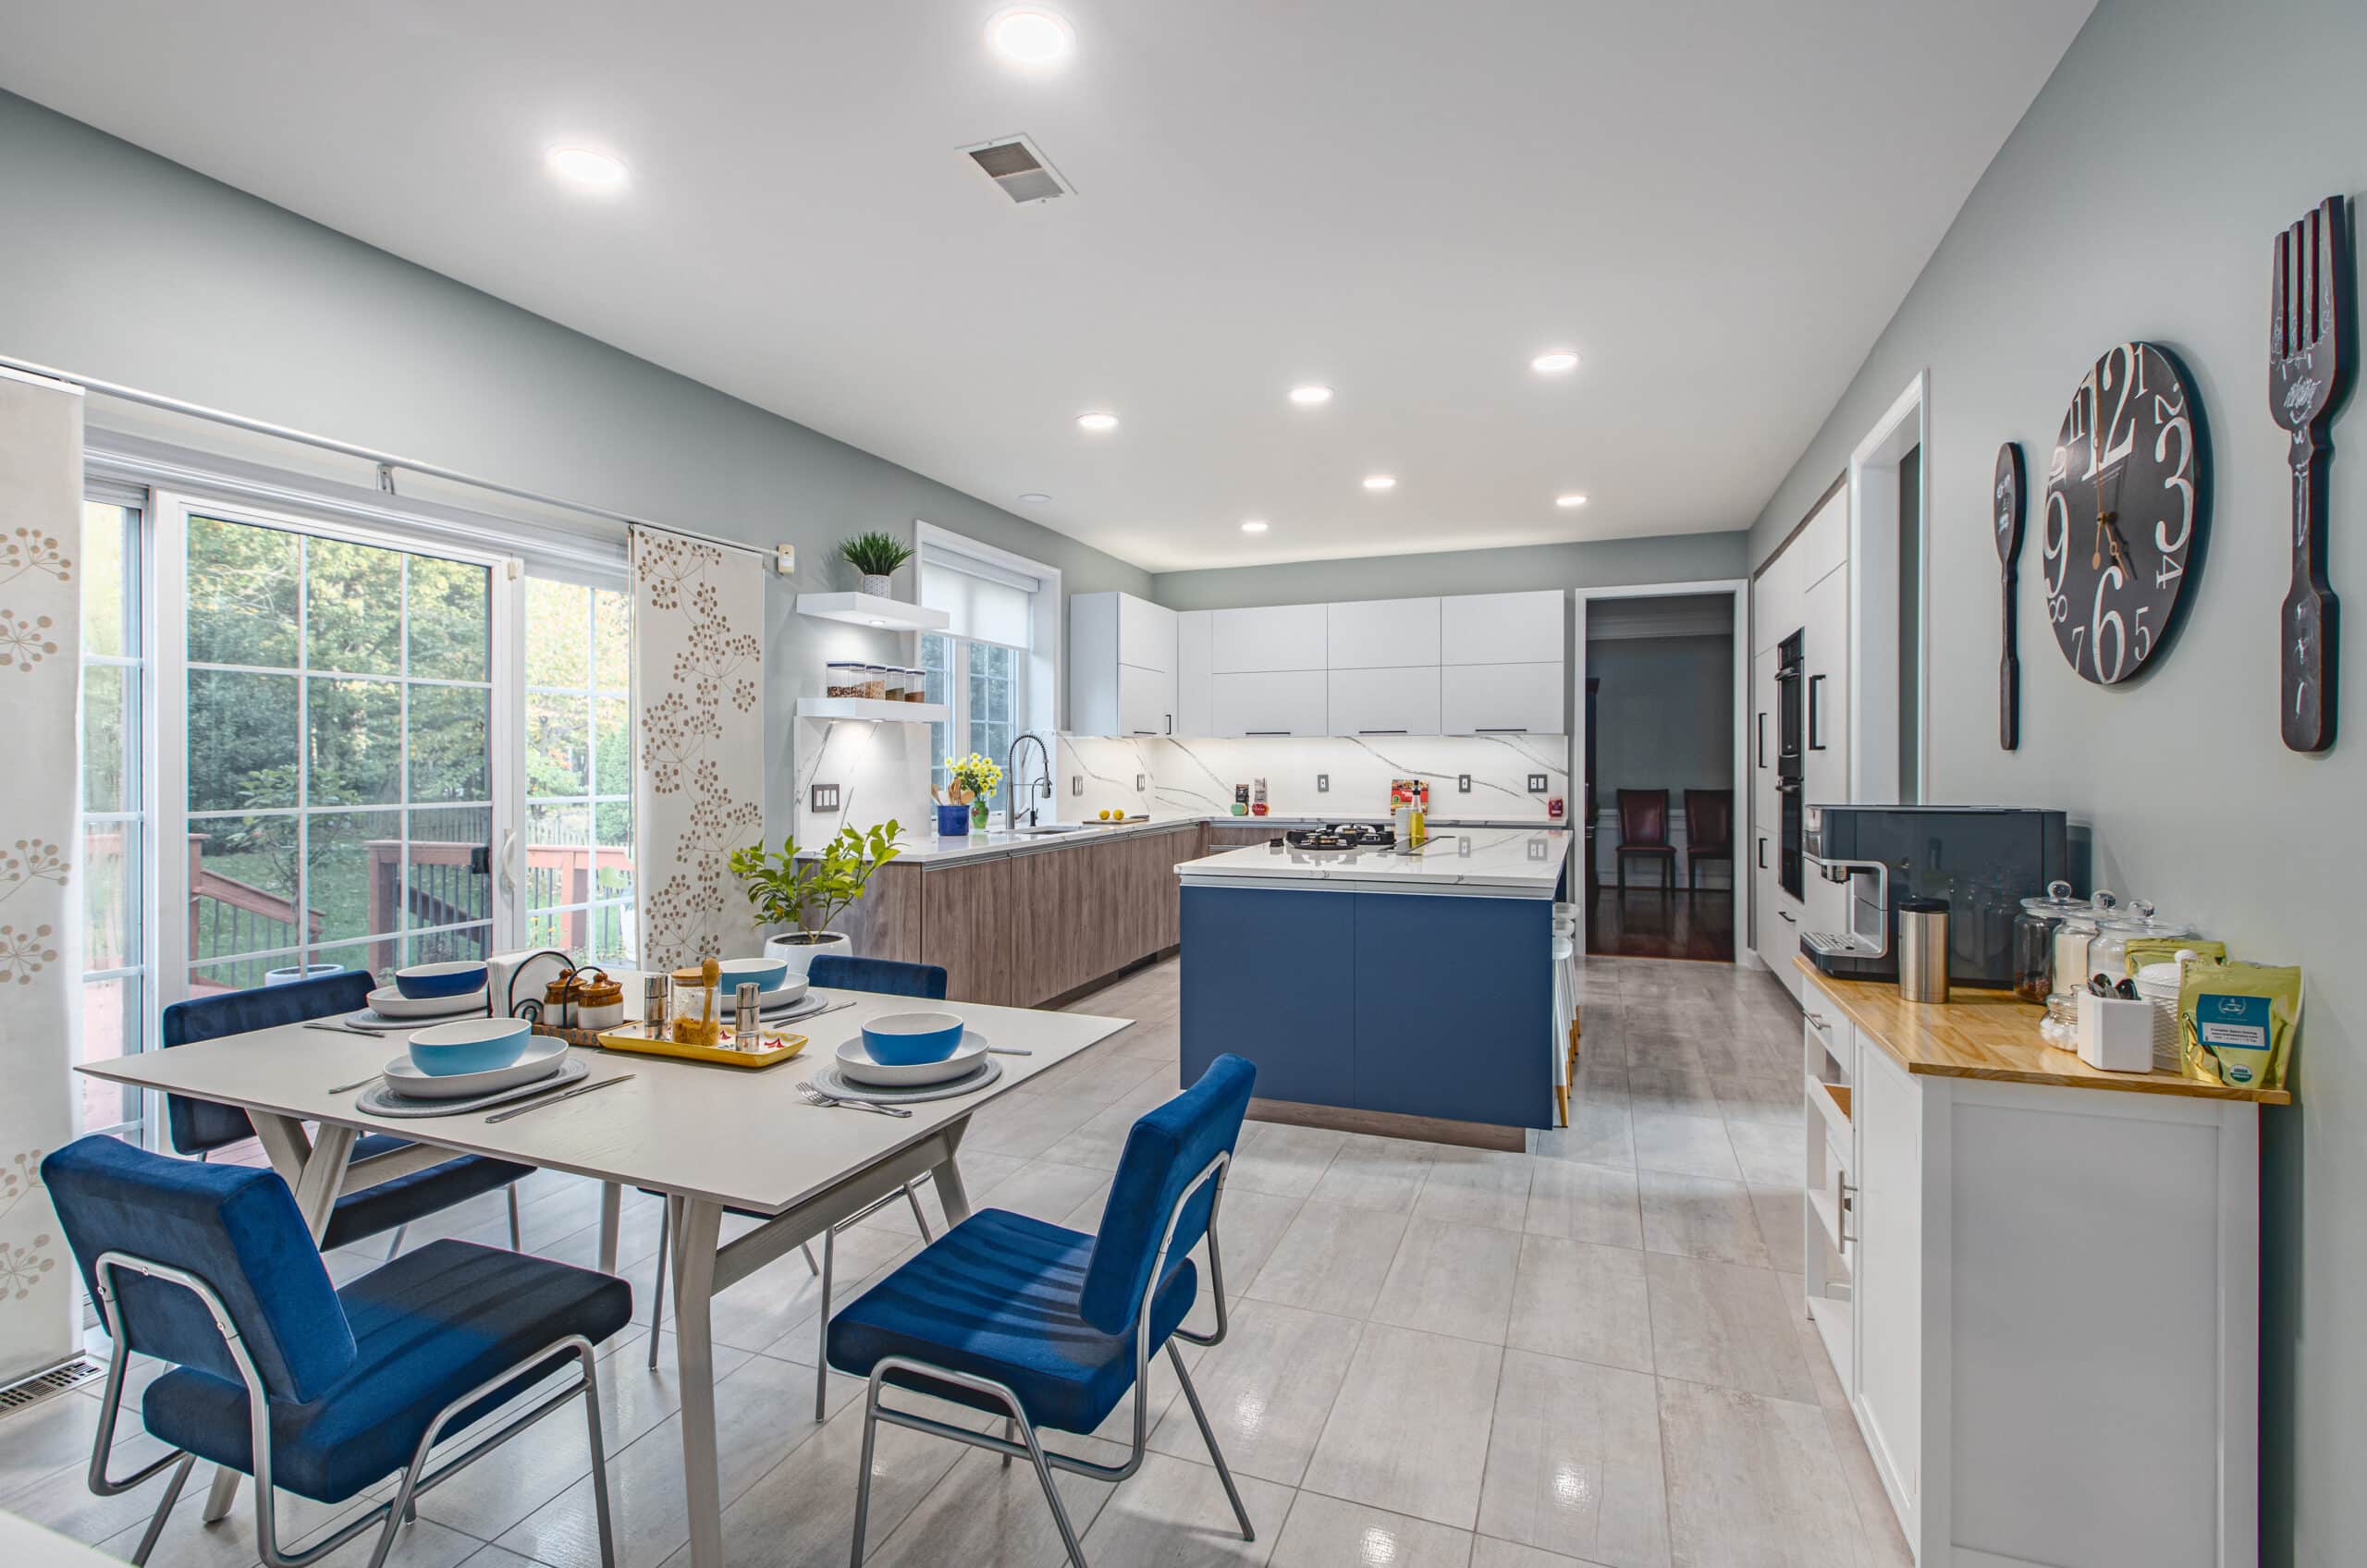 A kitchen with blue chairs and a dining table